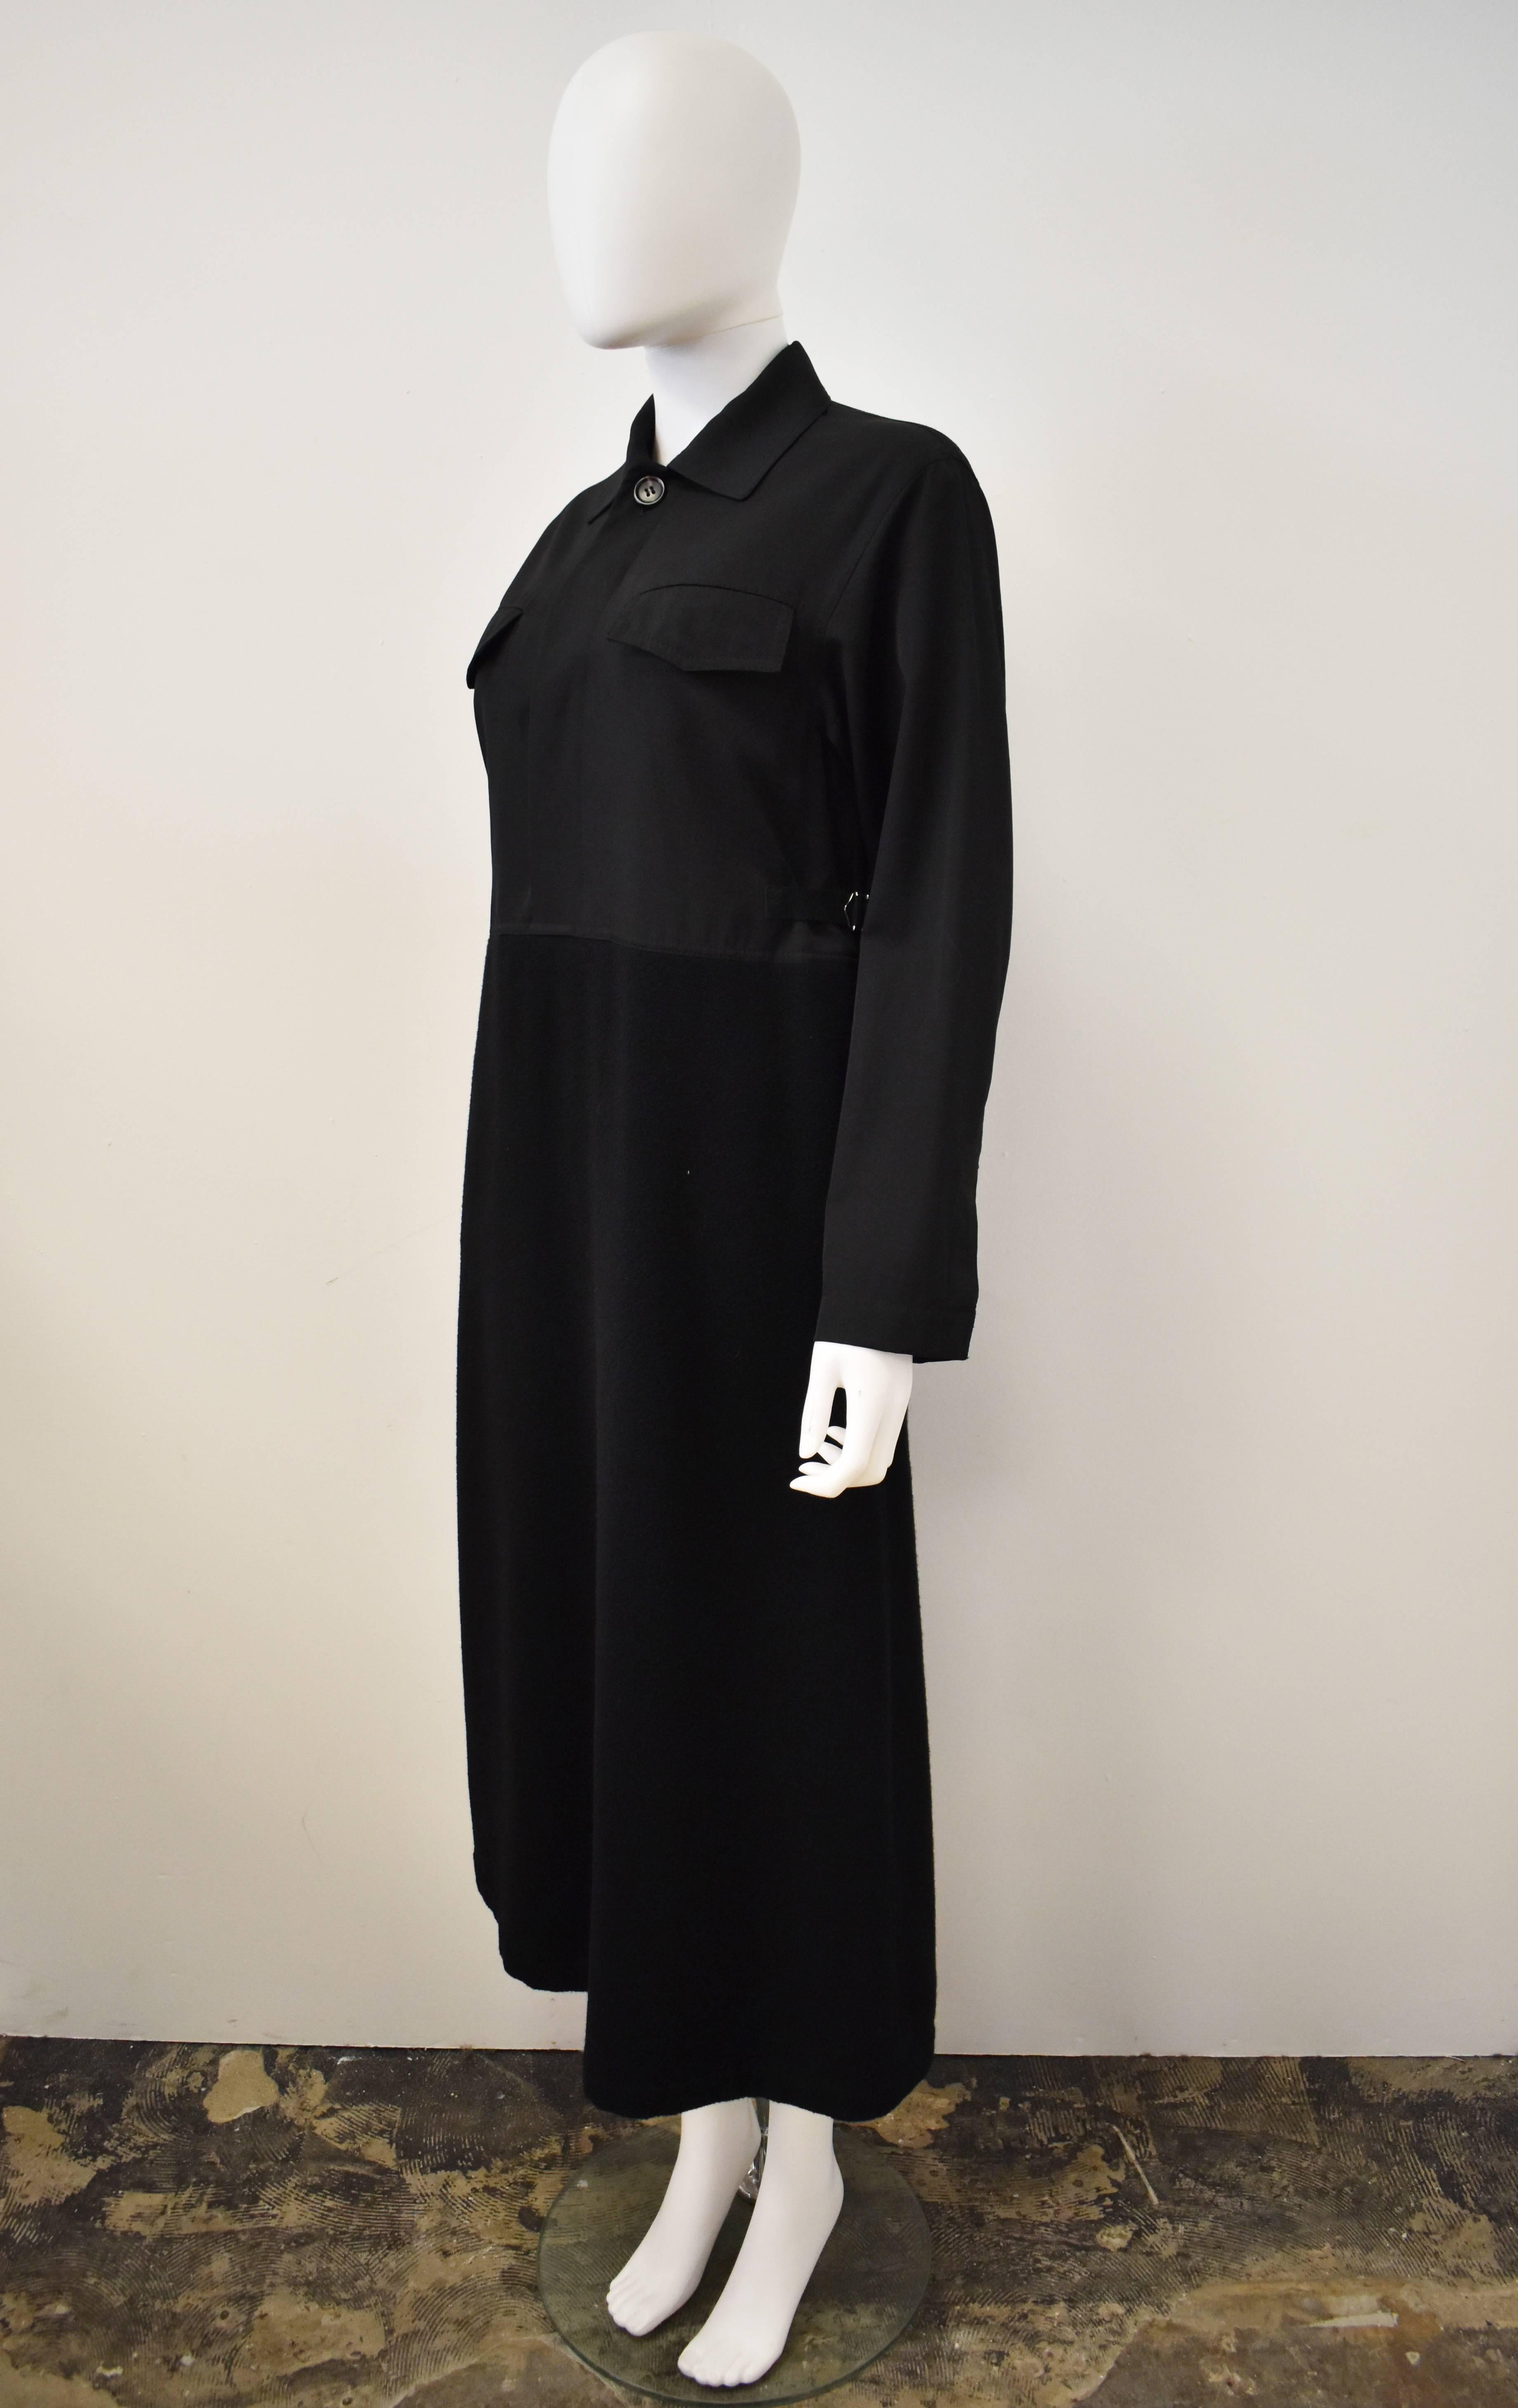 Comme des Garcons Black Tricot Dress with shirt top and wool skirt. The long-sleeve dress has a shirt design top made of a thinner cotton/wool blend and has a contrast thick wool skirt. It has buttons at the neckline and D-ring fasteners at the